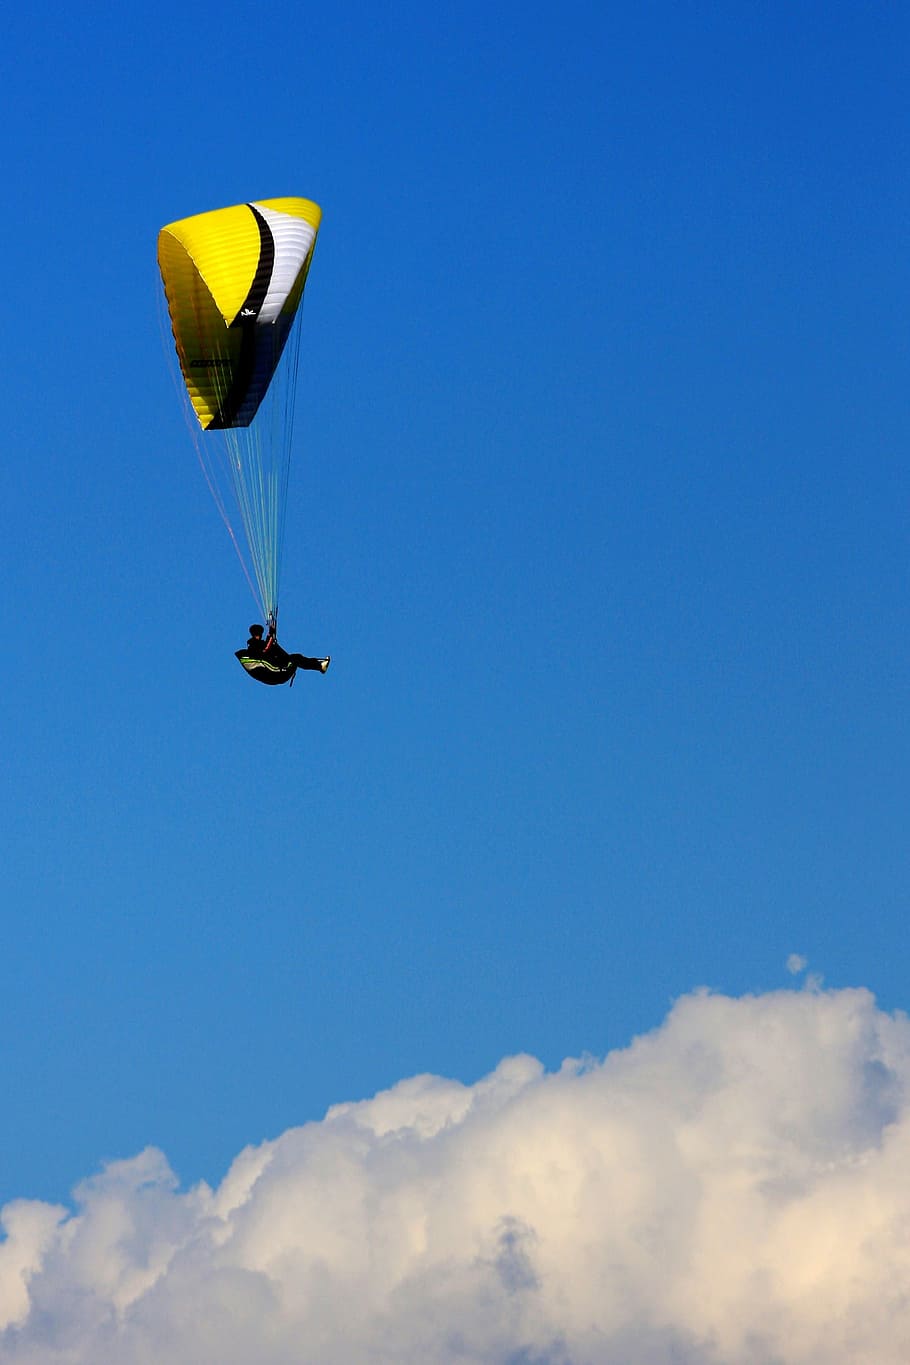 dom, parachute, sky, extreme, clouds, high, skydive, flying, extreme Sports, sport